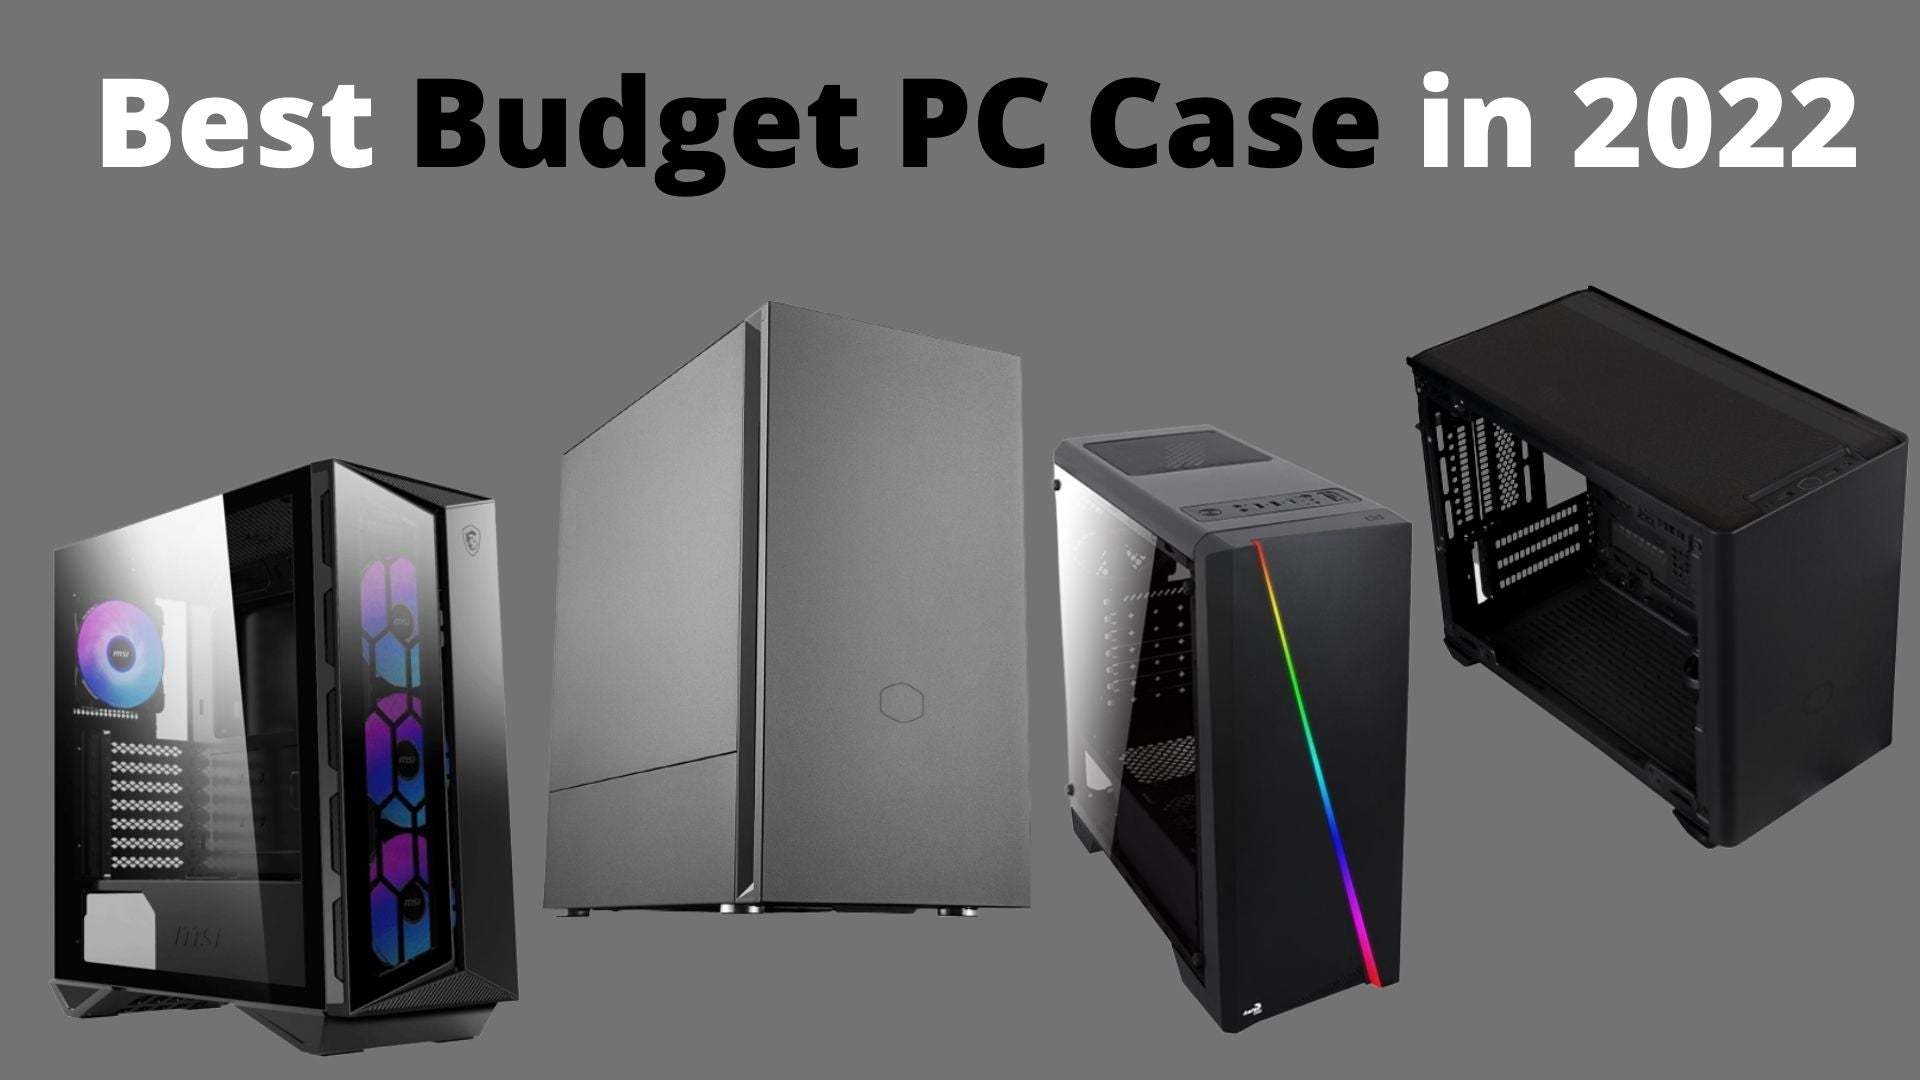 Computer Case, Mid Tower, Full Tower PC Case | Buying PC Case - Think24 Gaming & Gadgets Qatar